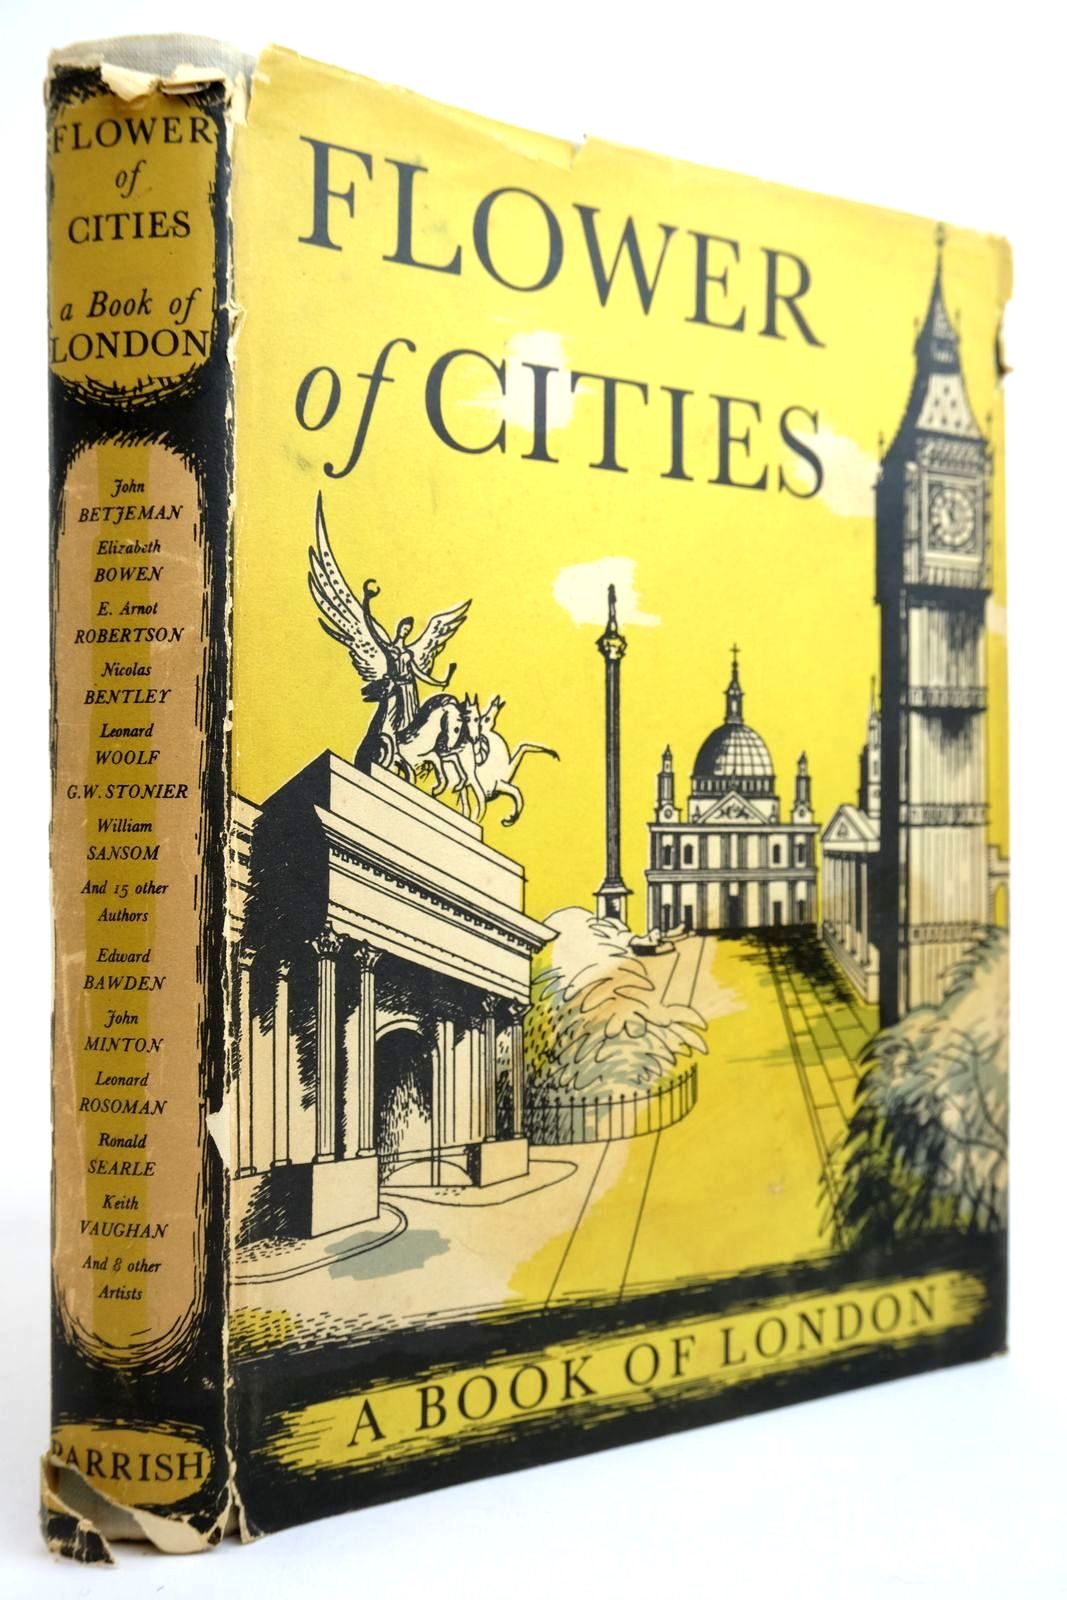 Photo of FLOWER OF CITIES A BOOK OF LONDON written by Betjeman, John Sykes, Christopher Maude, Angus Bowen, Elizabeth et al, illustrated by Bawden, Edward Knight, David Searle, Ronald Jones, Barbara et al., published by Max Parrish And Co Ltd (STOCK CODE: 2134330)  for sale by Stella & Rose's Books